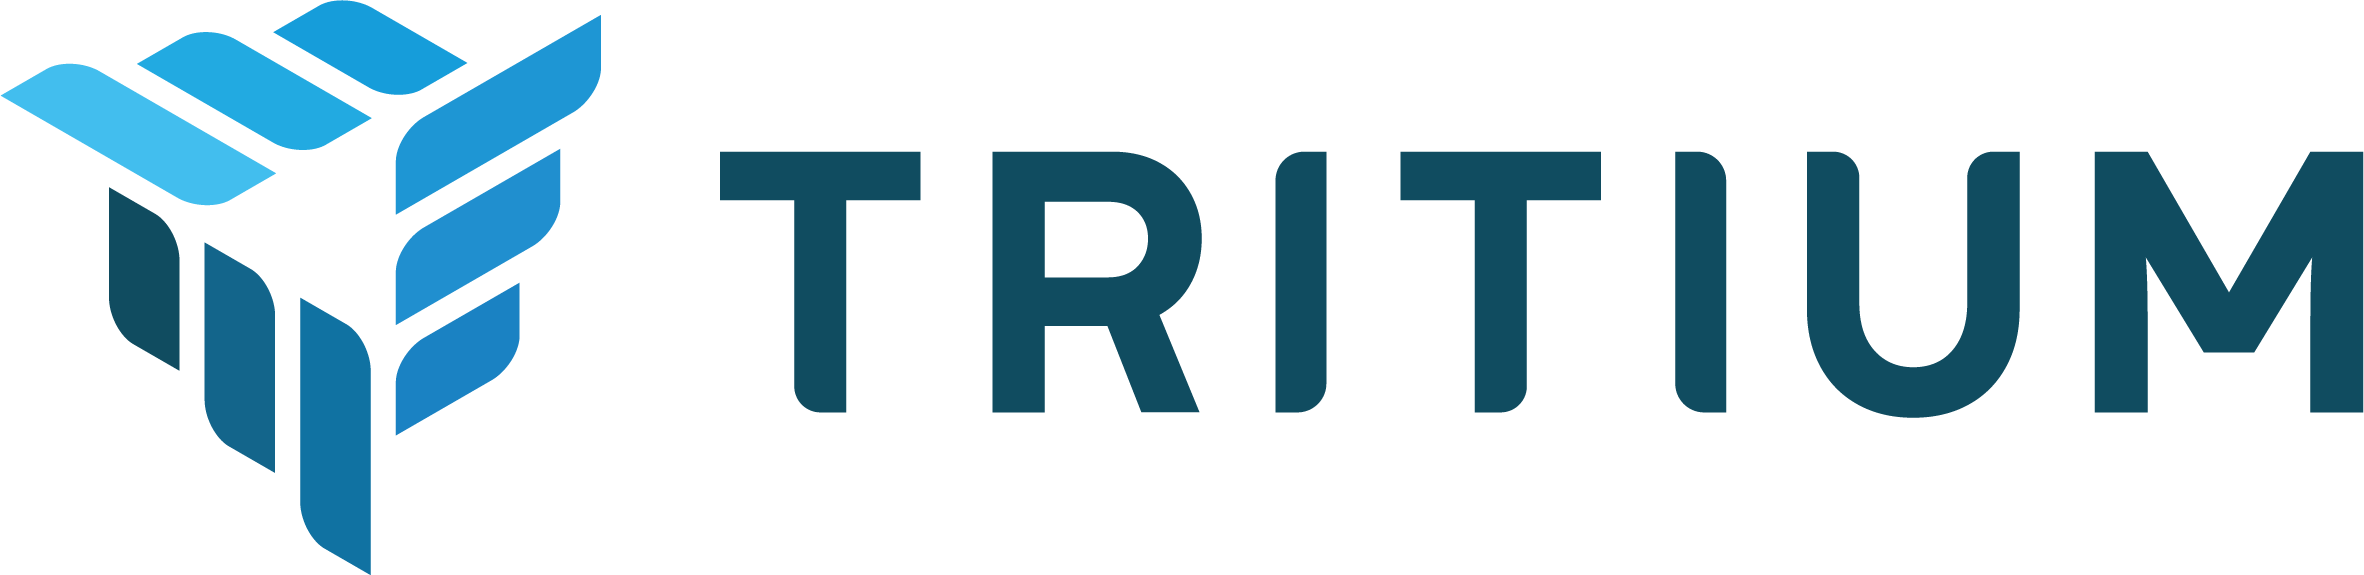 Tritium Becomes First Manufacturer to Win NEVI Fast Charger Order; Company to Provide All Fast Chargers for First Phase of Hawai’i NEVI Program